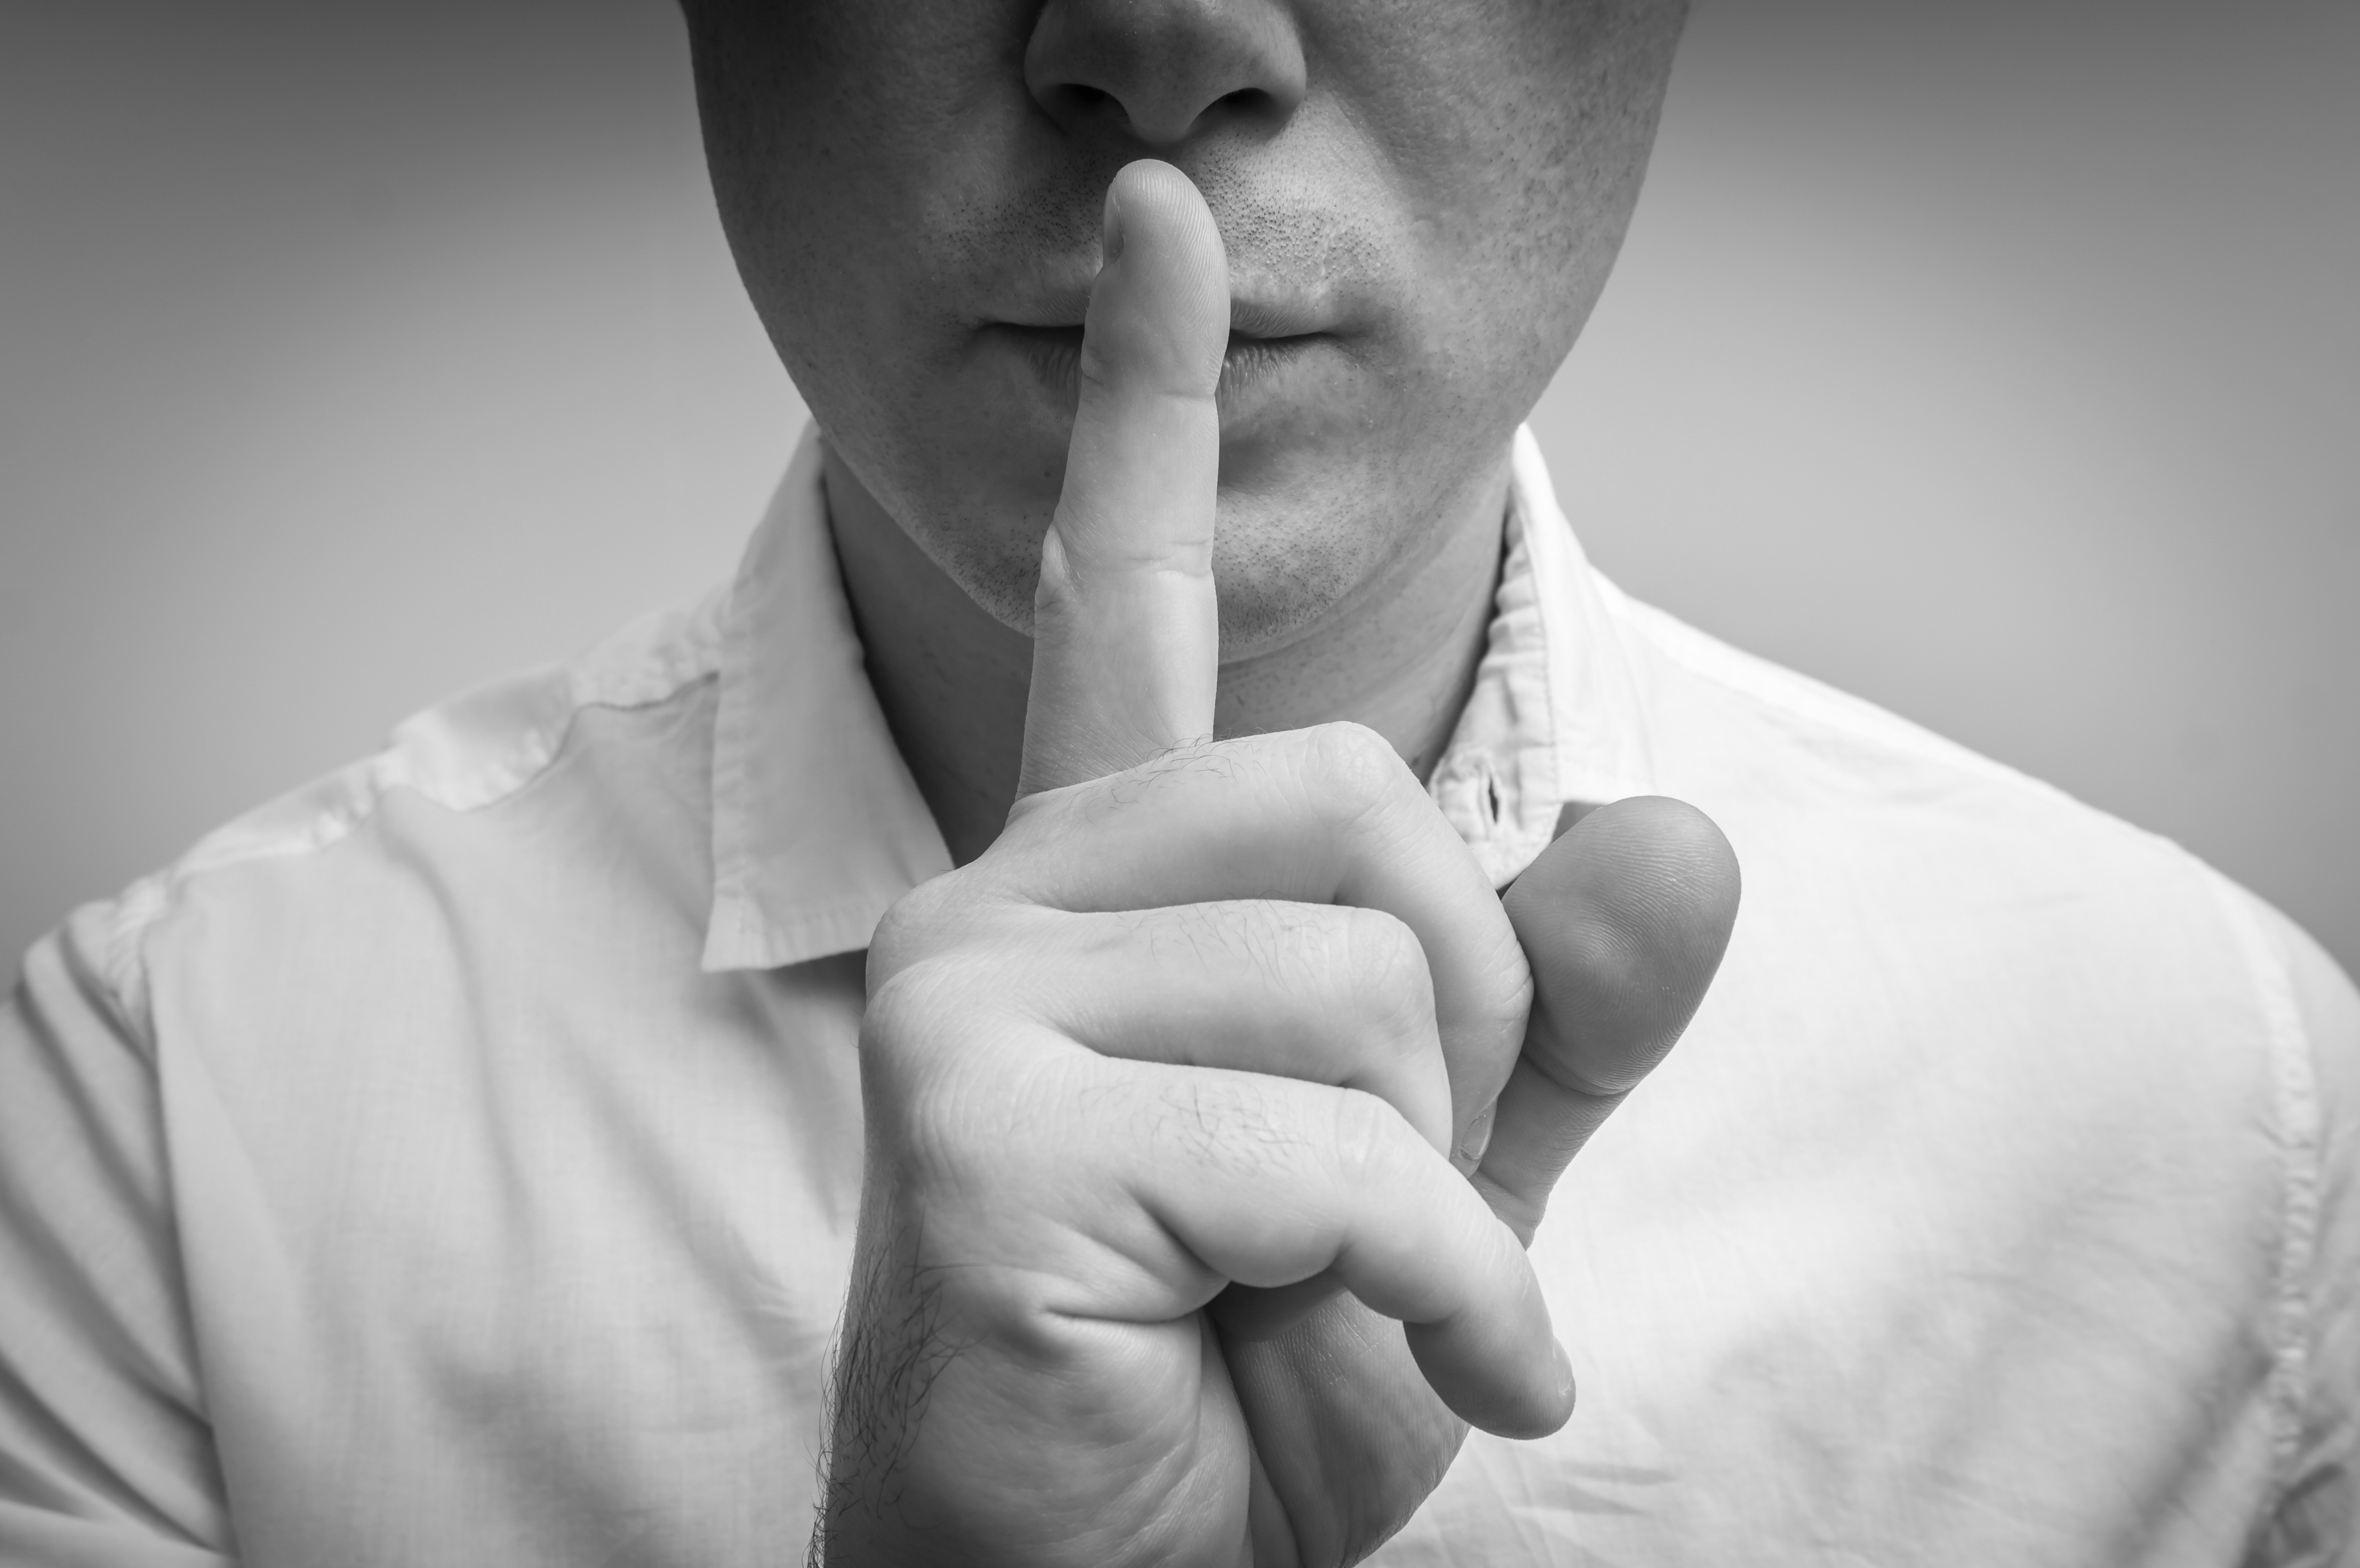 A man with a finger on his lips | Source: Shutterstock